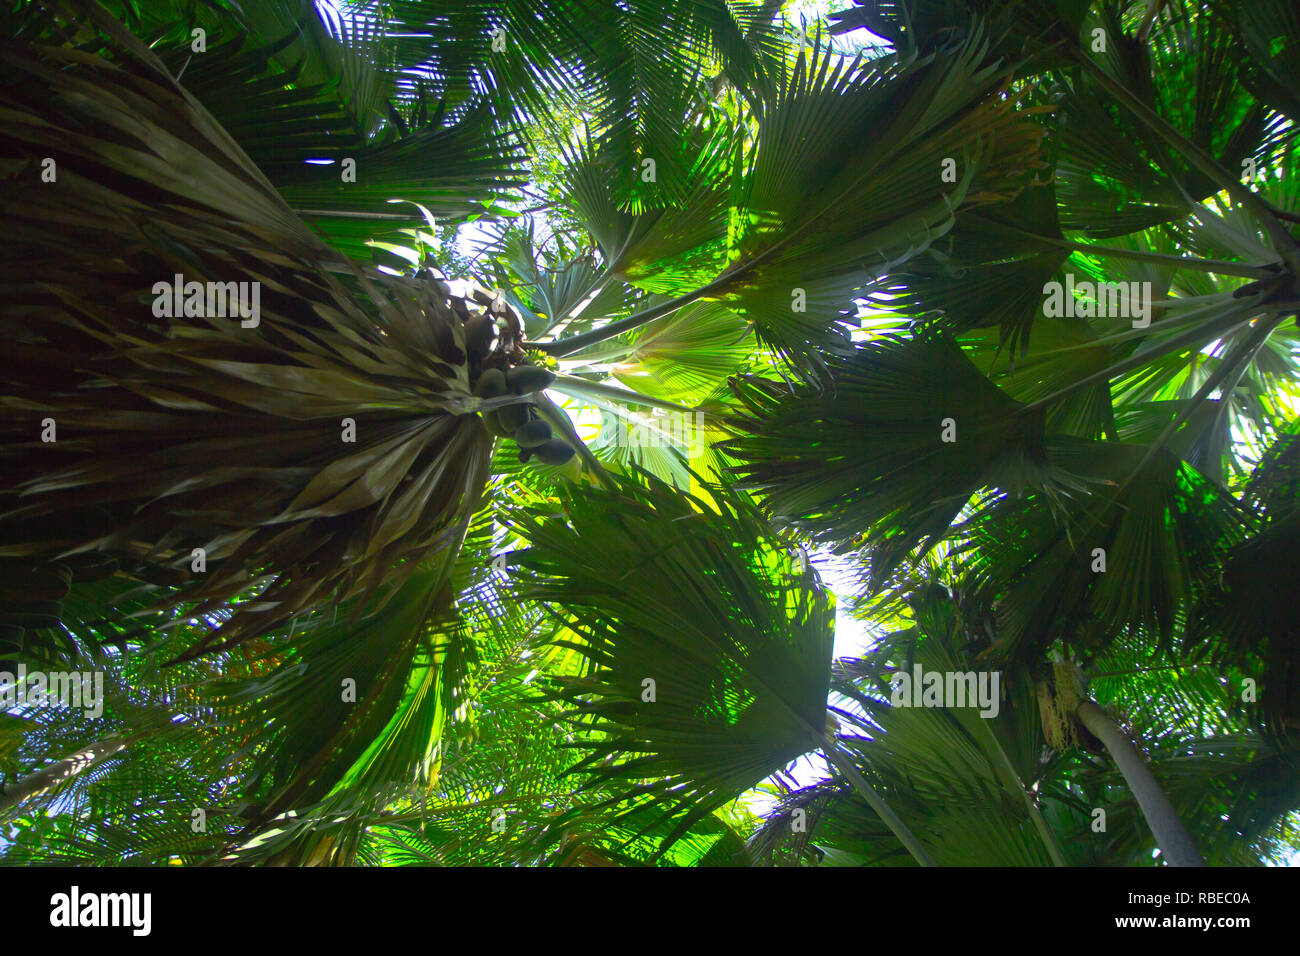 Nut and tree of the coco de mer, a rare species of palm tree native to ...